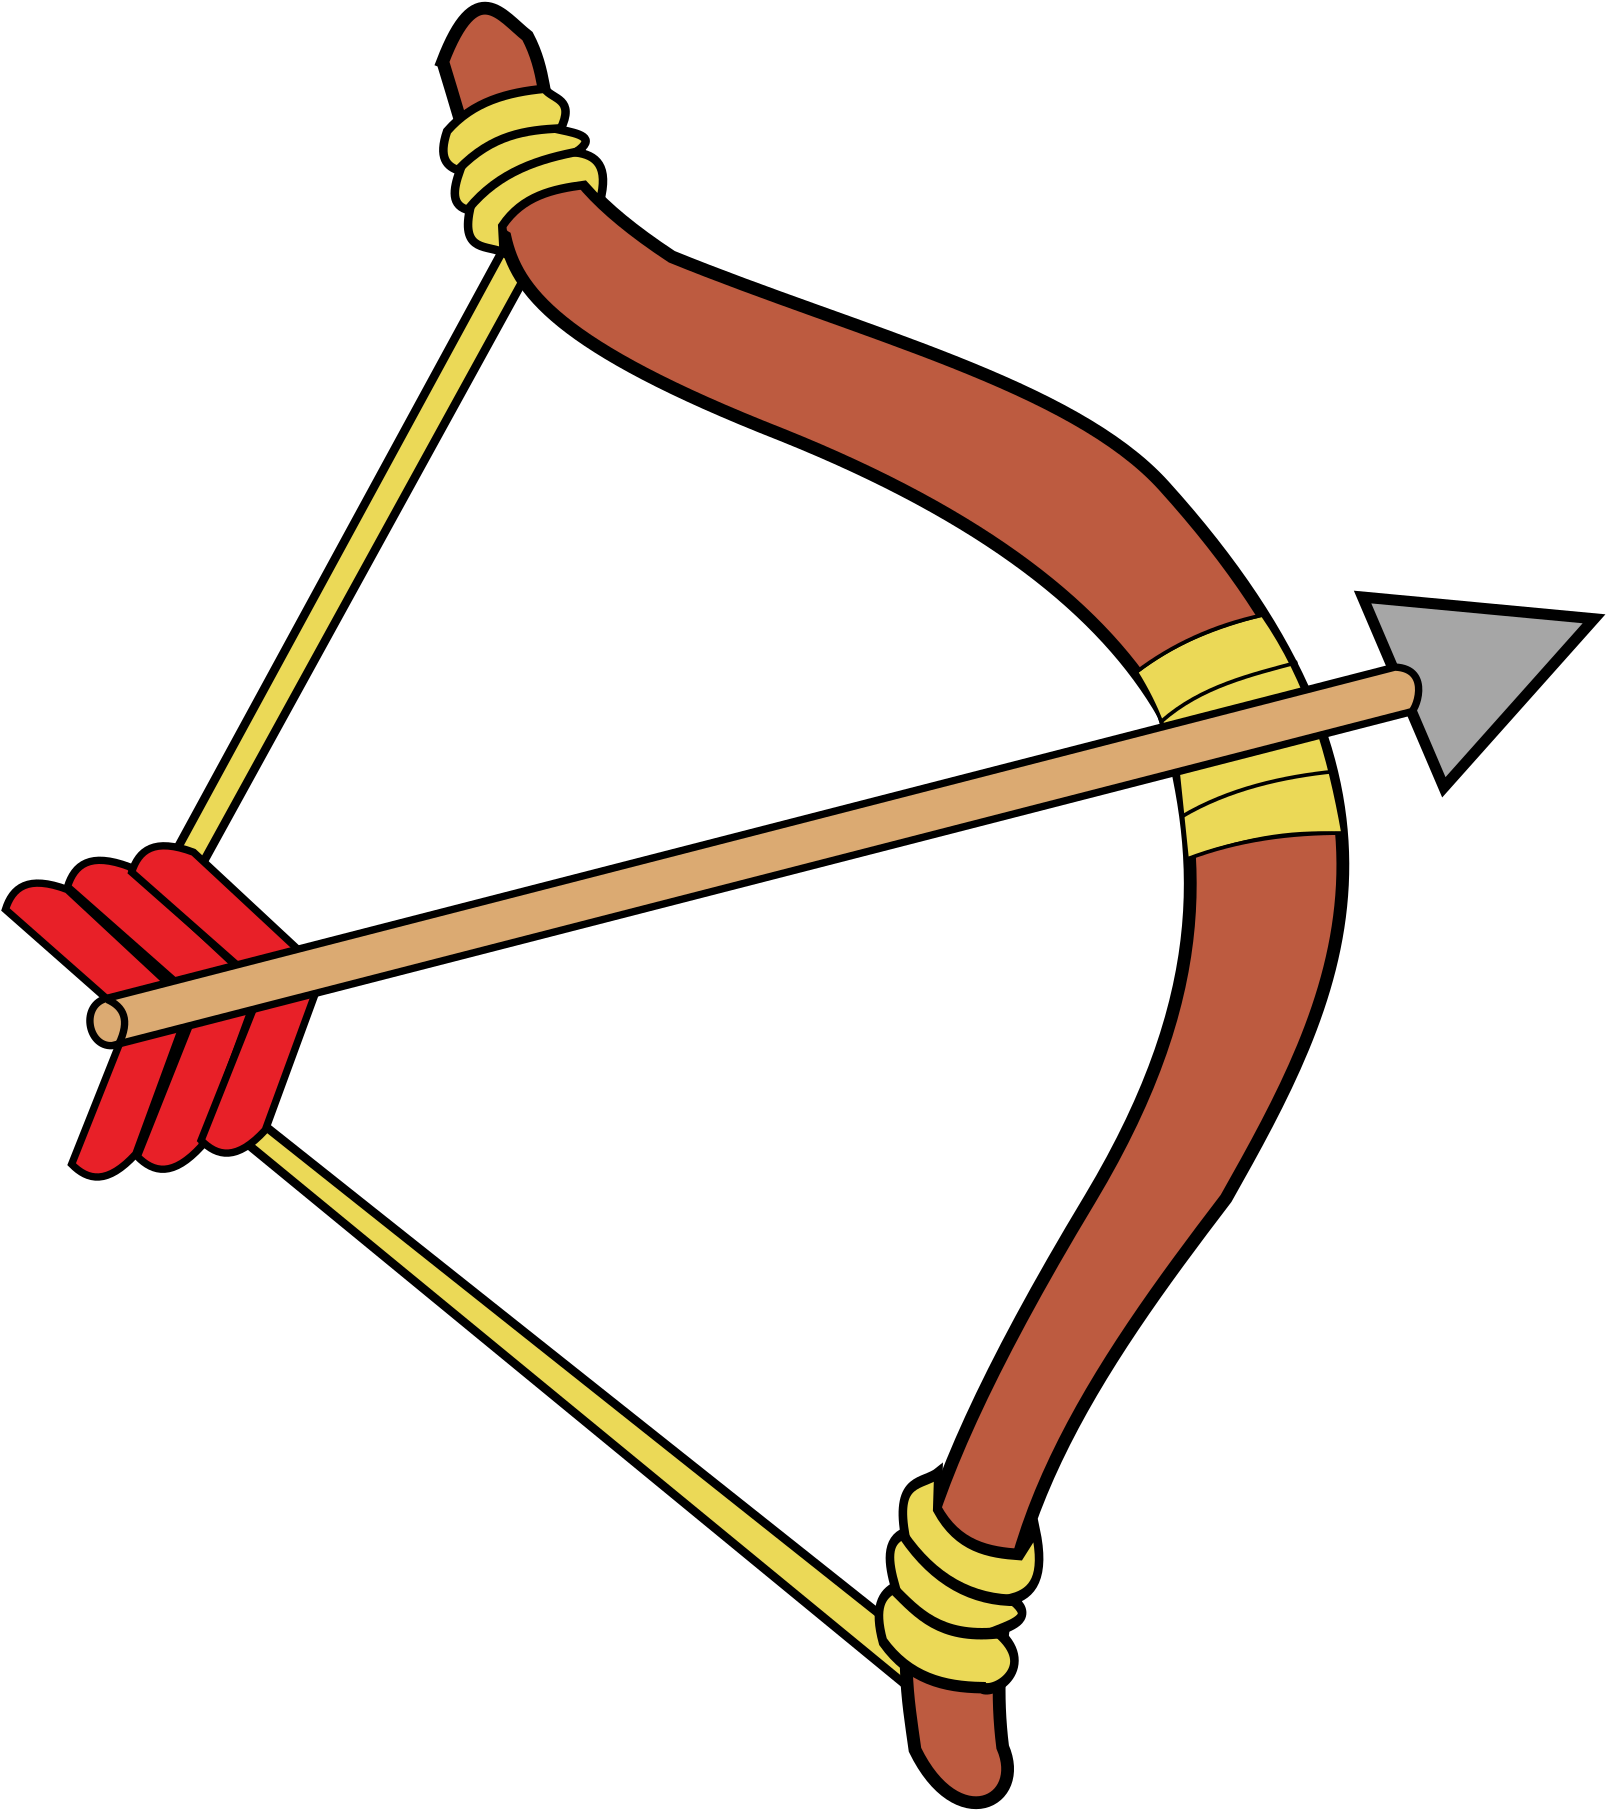 Bows and arrows